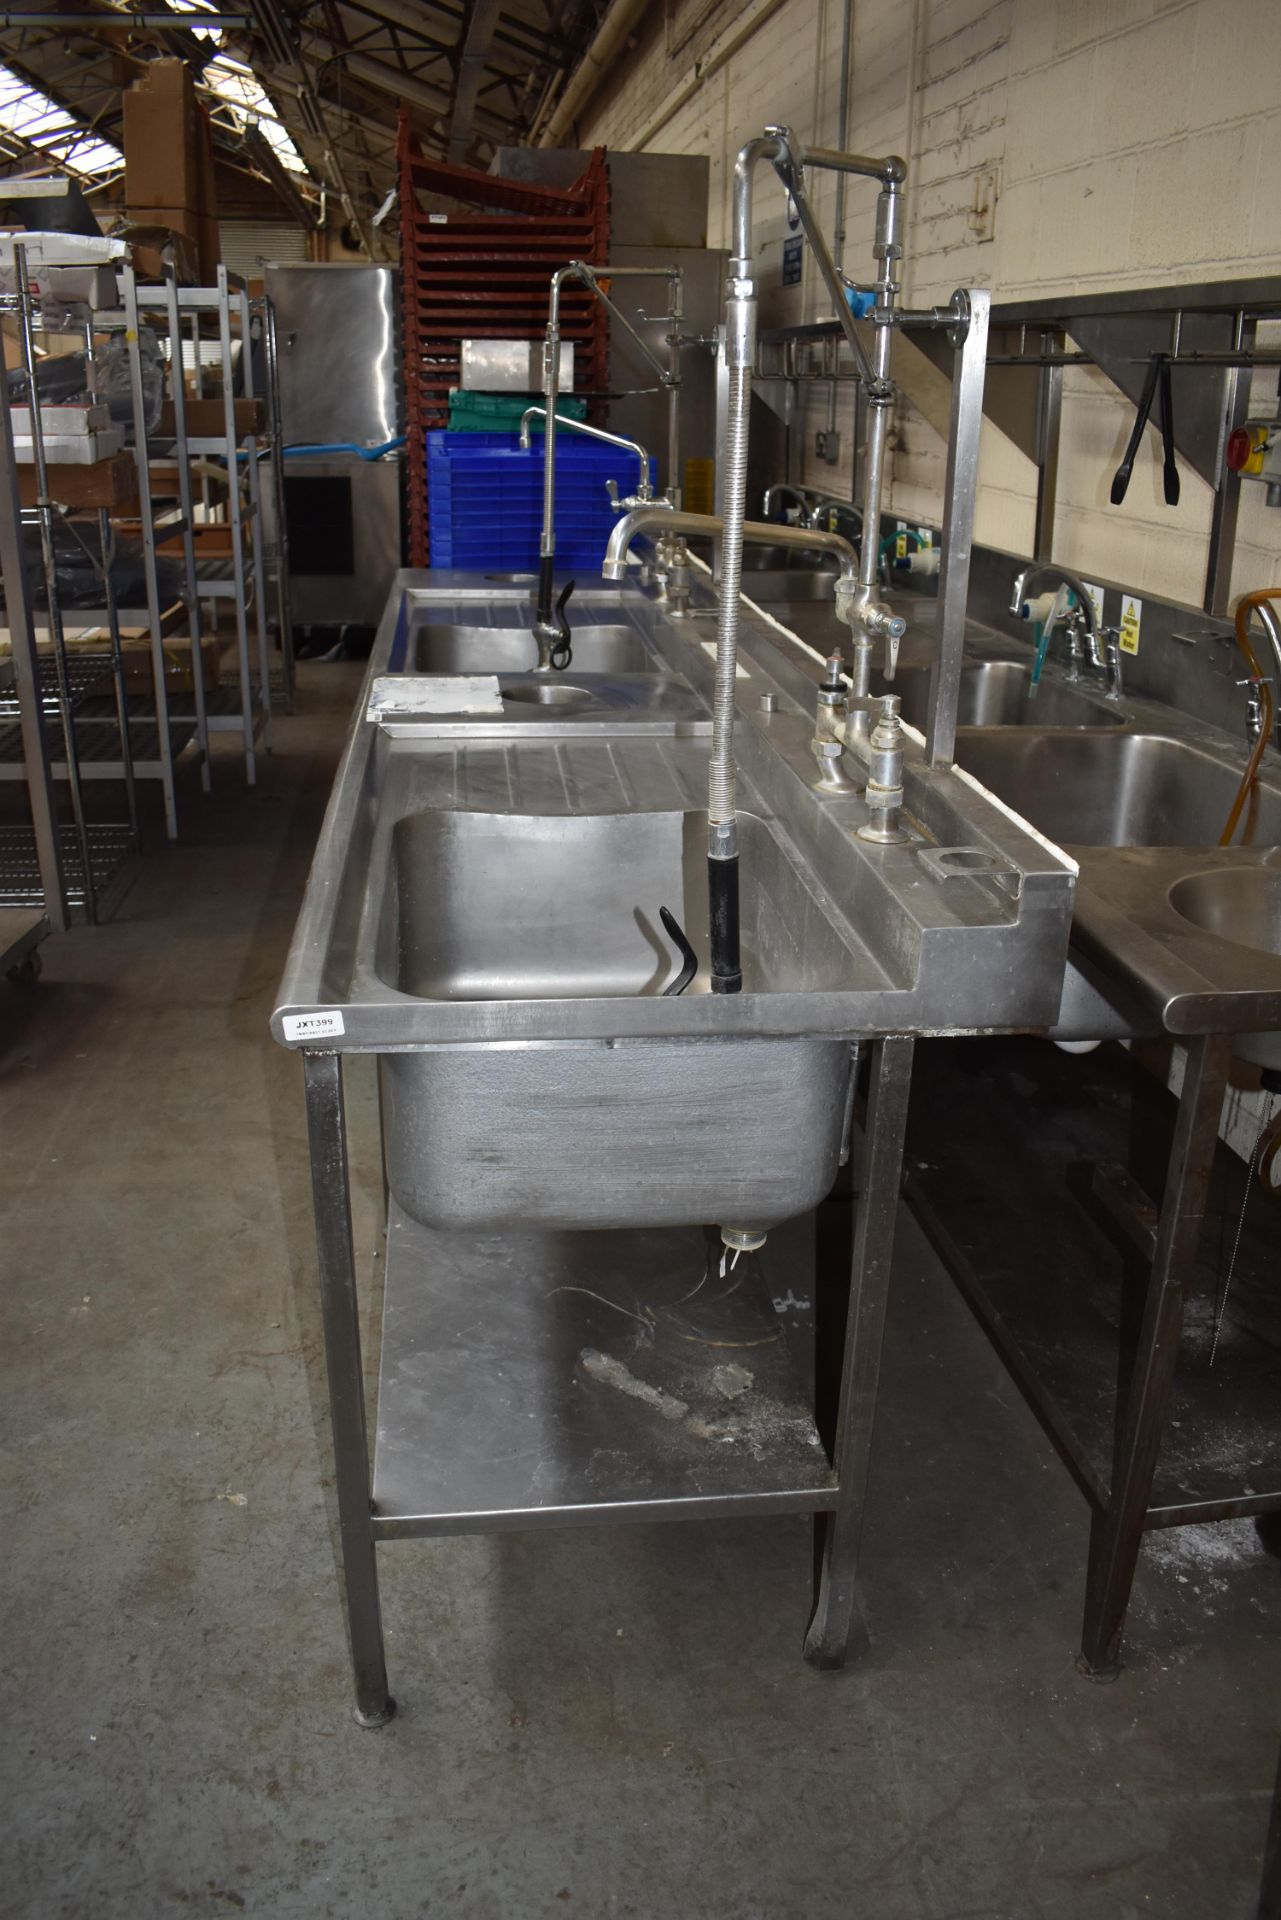 1 x Stainless Steel Commercial Wash Basin Unit With Twin Sink Bowl and Drainers, Mixer Taps, Spray H - Image 9 of 12